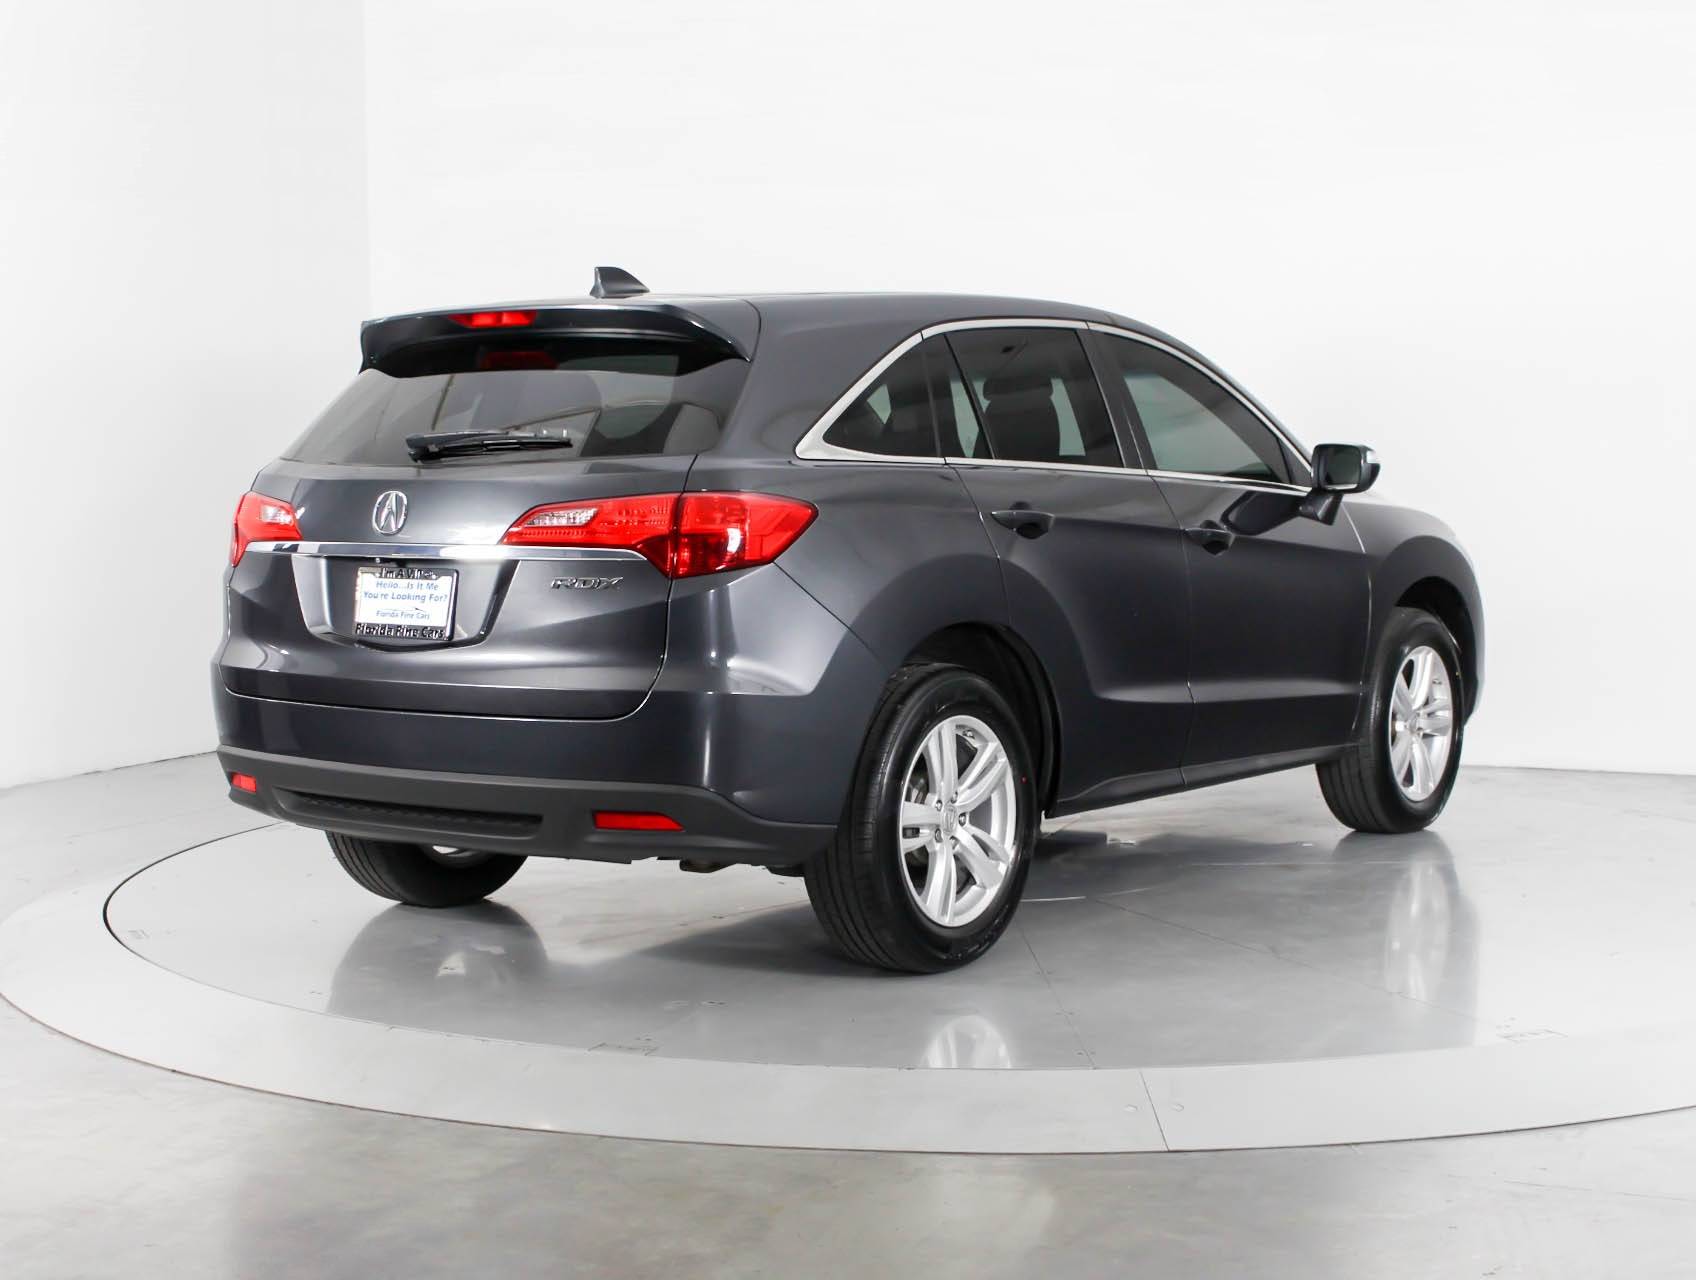 Florida Fine Cars - Used ACURA RDX 2015 MIAMI TECHNOLOGY PACKAGE